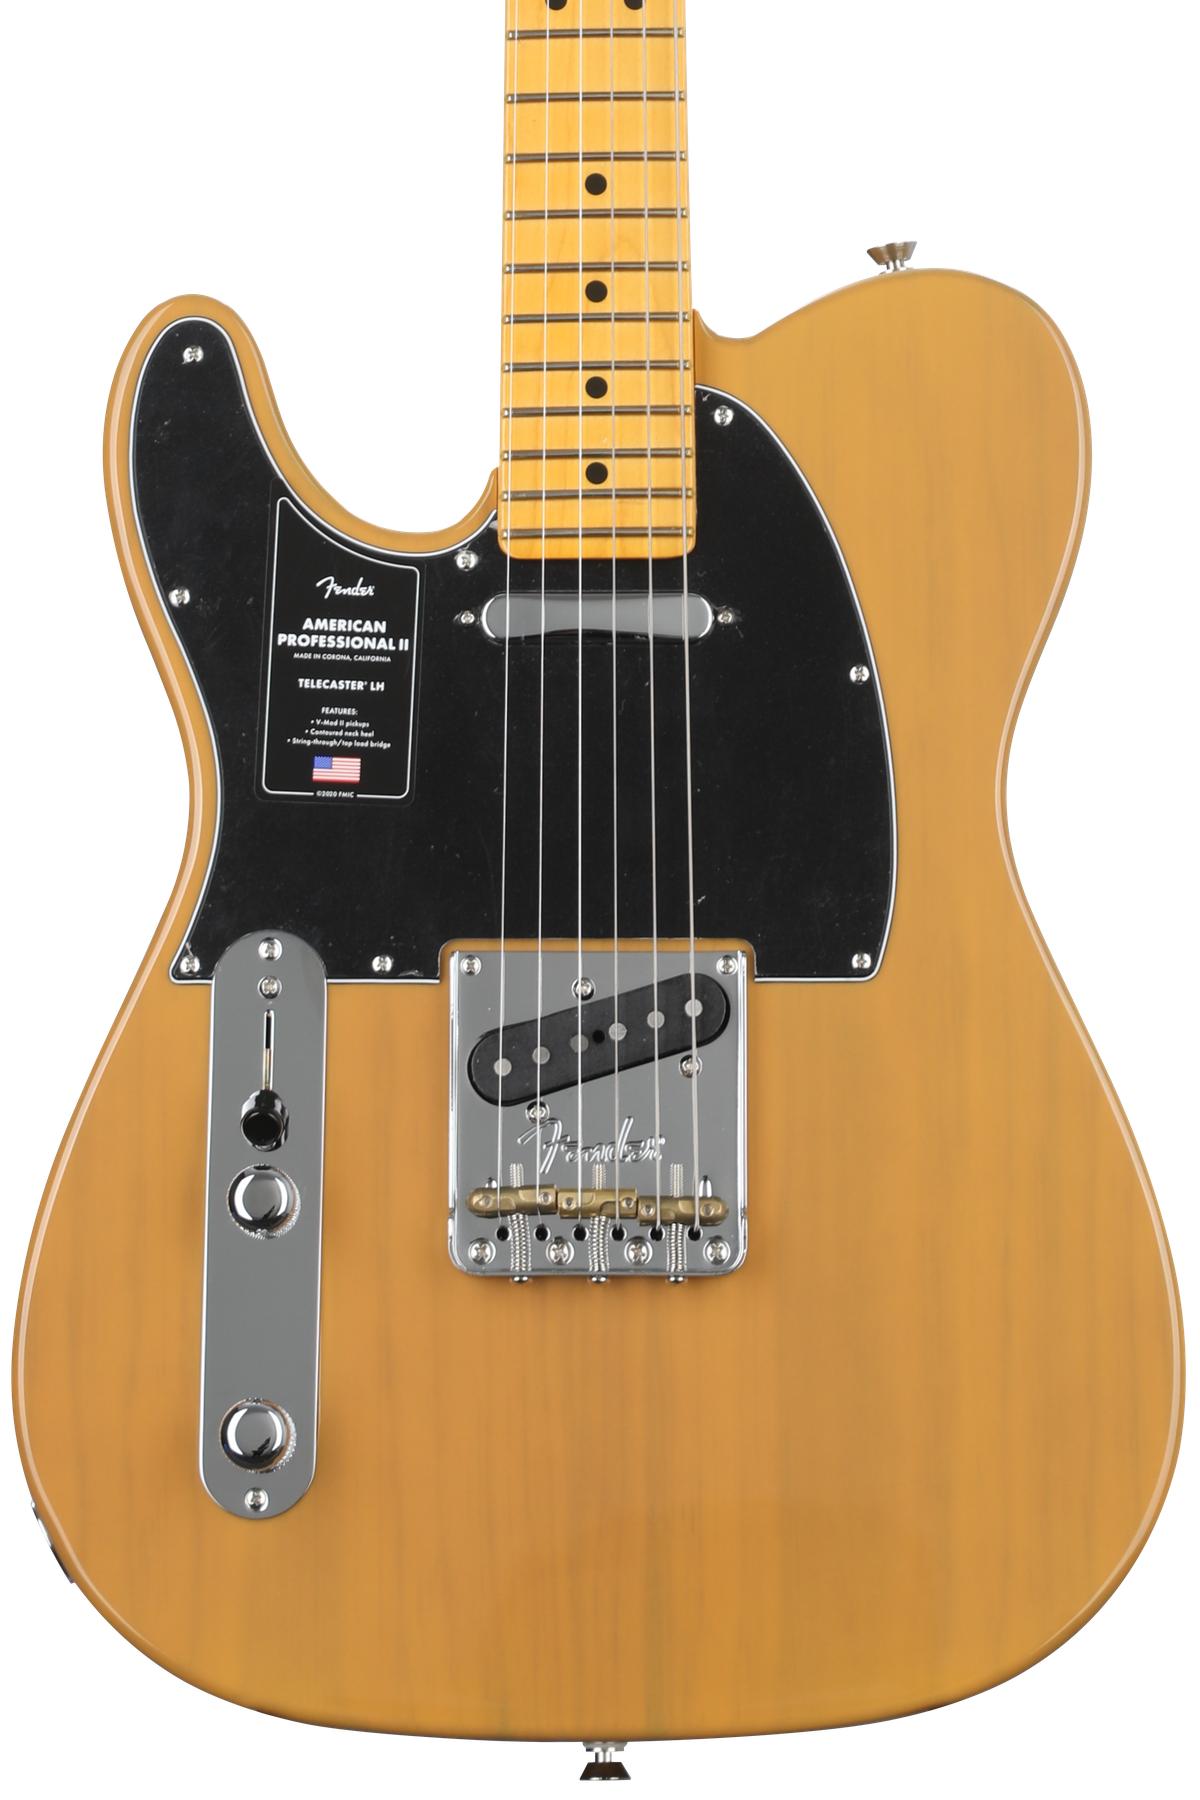 Fender American Professional II Telecaster Left-handed - Butterscotch Blonde with Maple Fingerboard